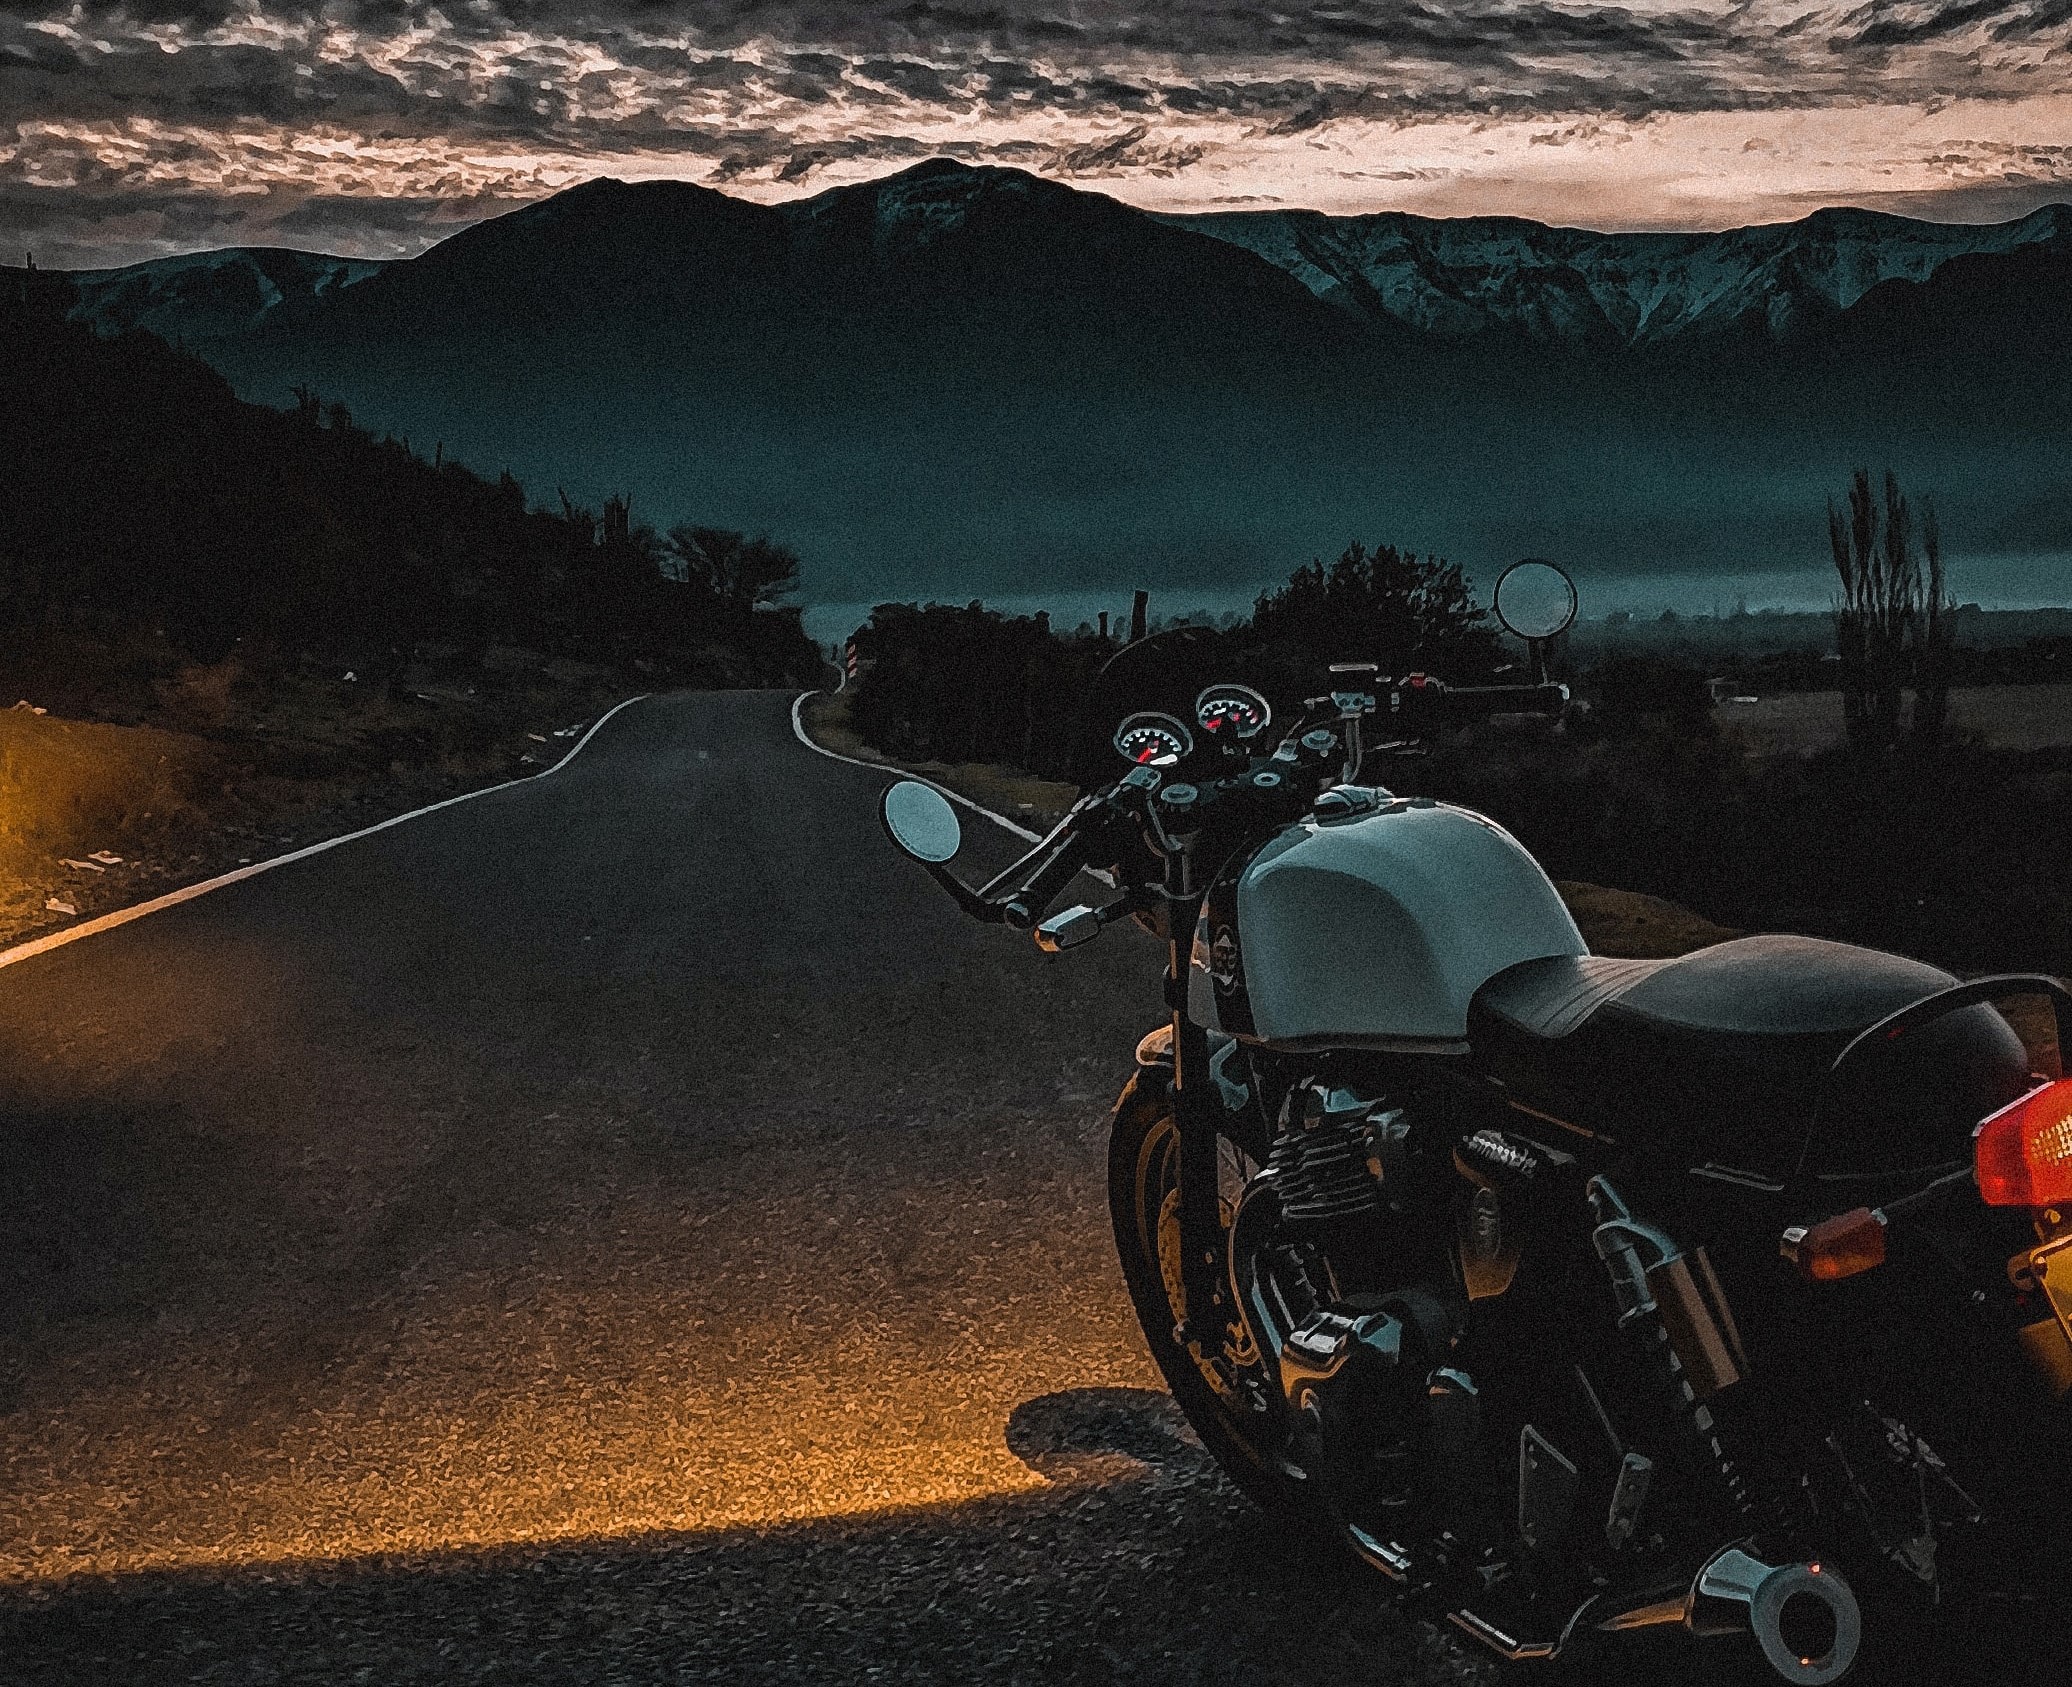 Motorcycle on a road during a sunset